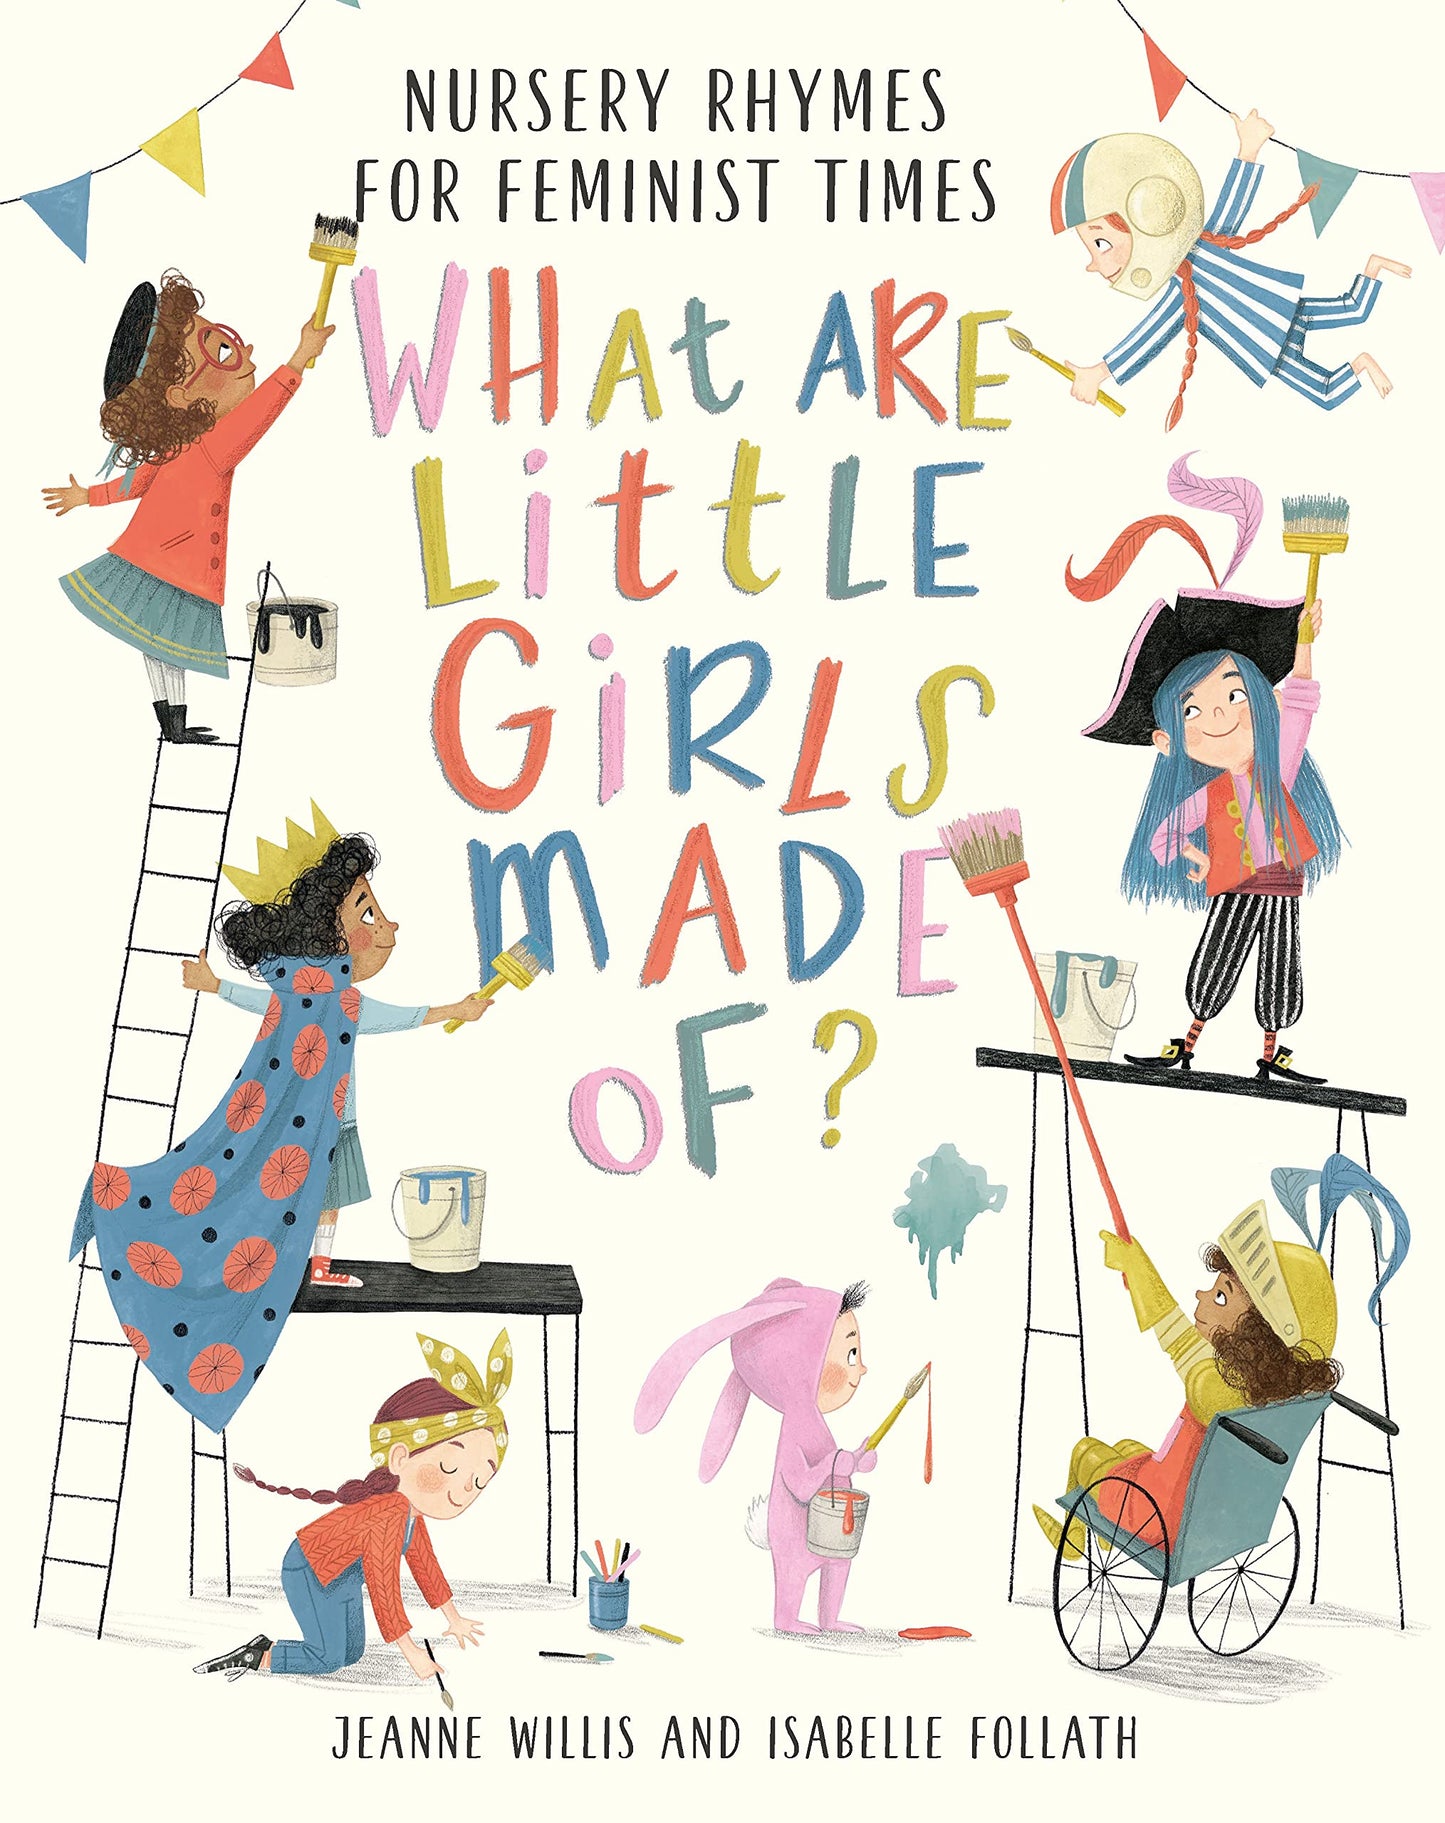 What Are Little Girls Made of? Nursery Rhymes for Feminist Times